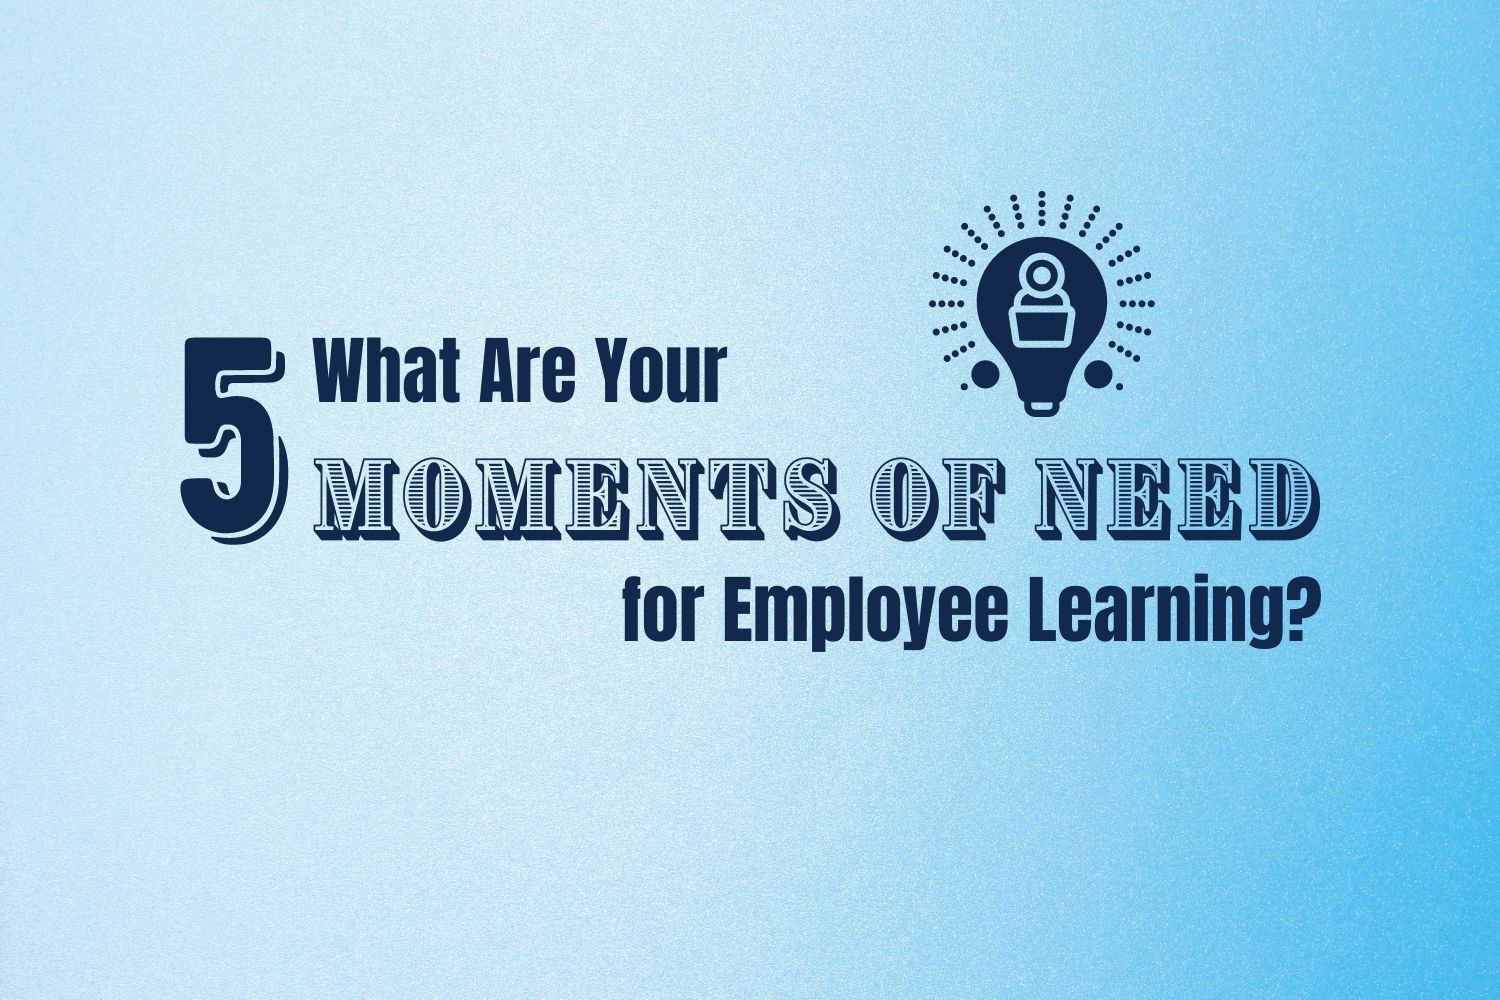 What Are Your 5 Moments of Need for Employee Learning?